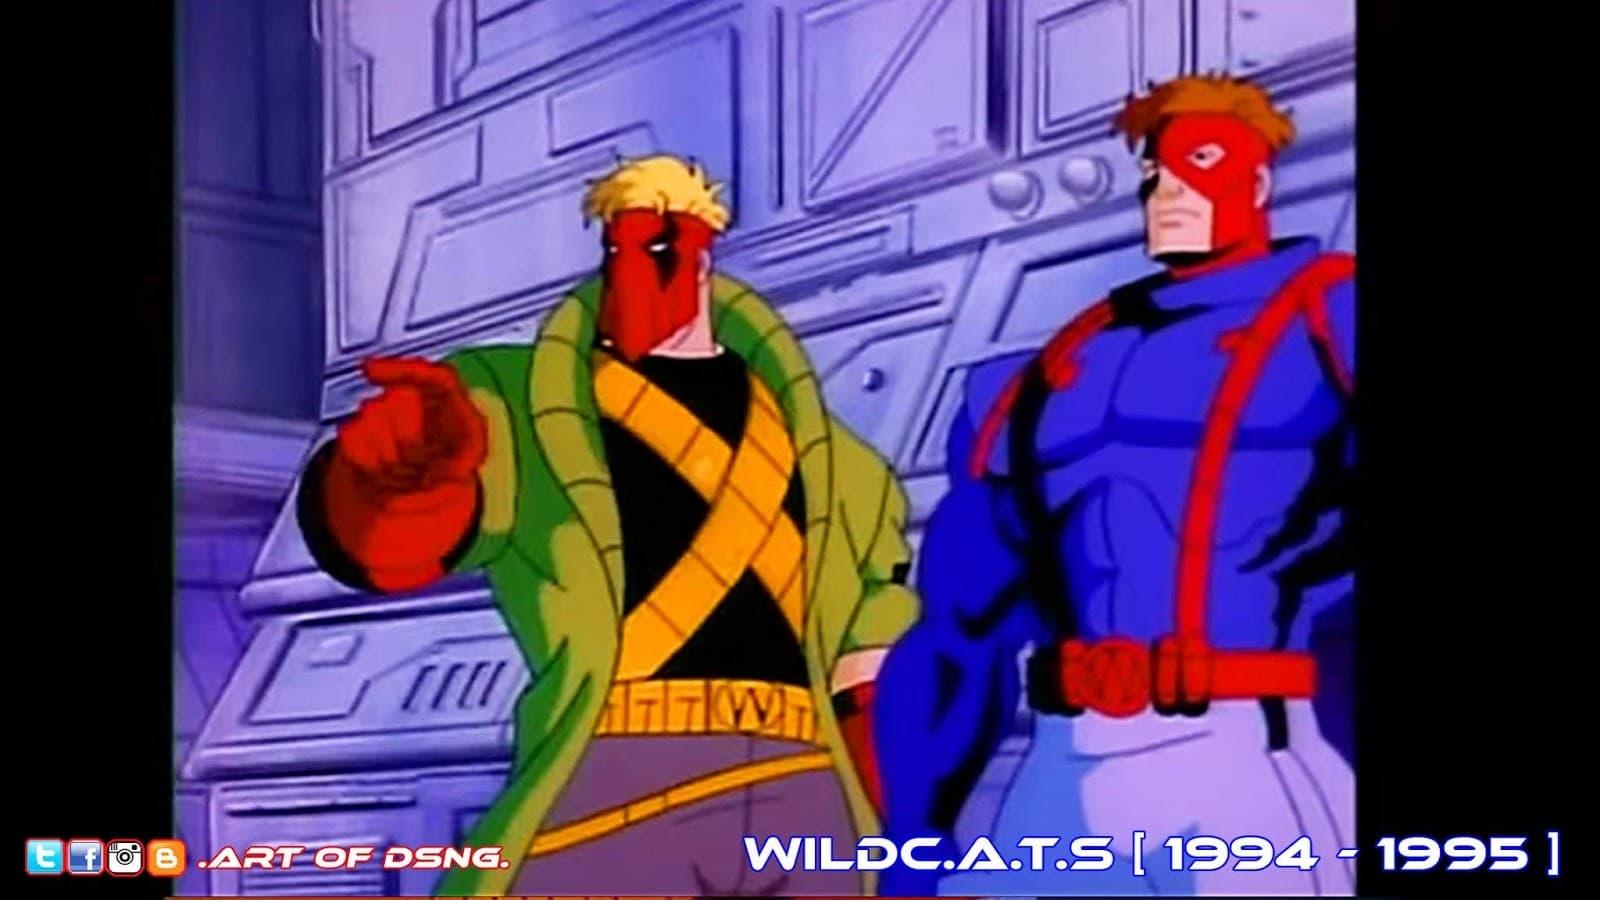 WildC.A.T.S: Covert Action Teams backdrop